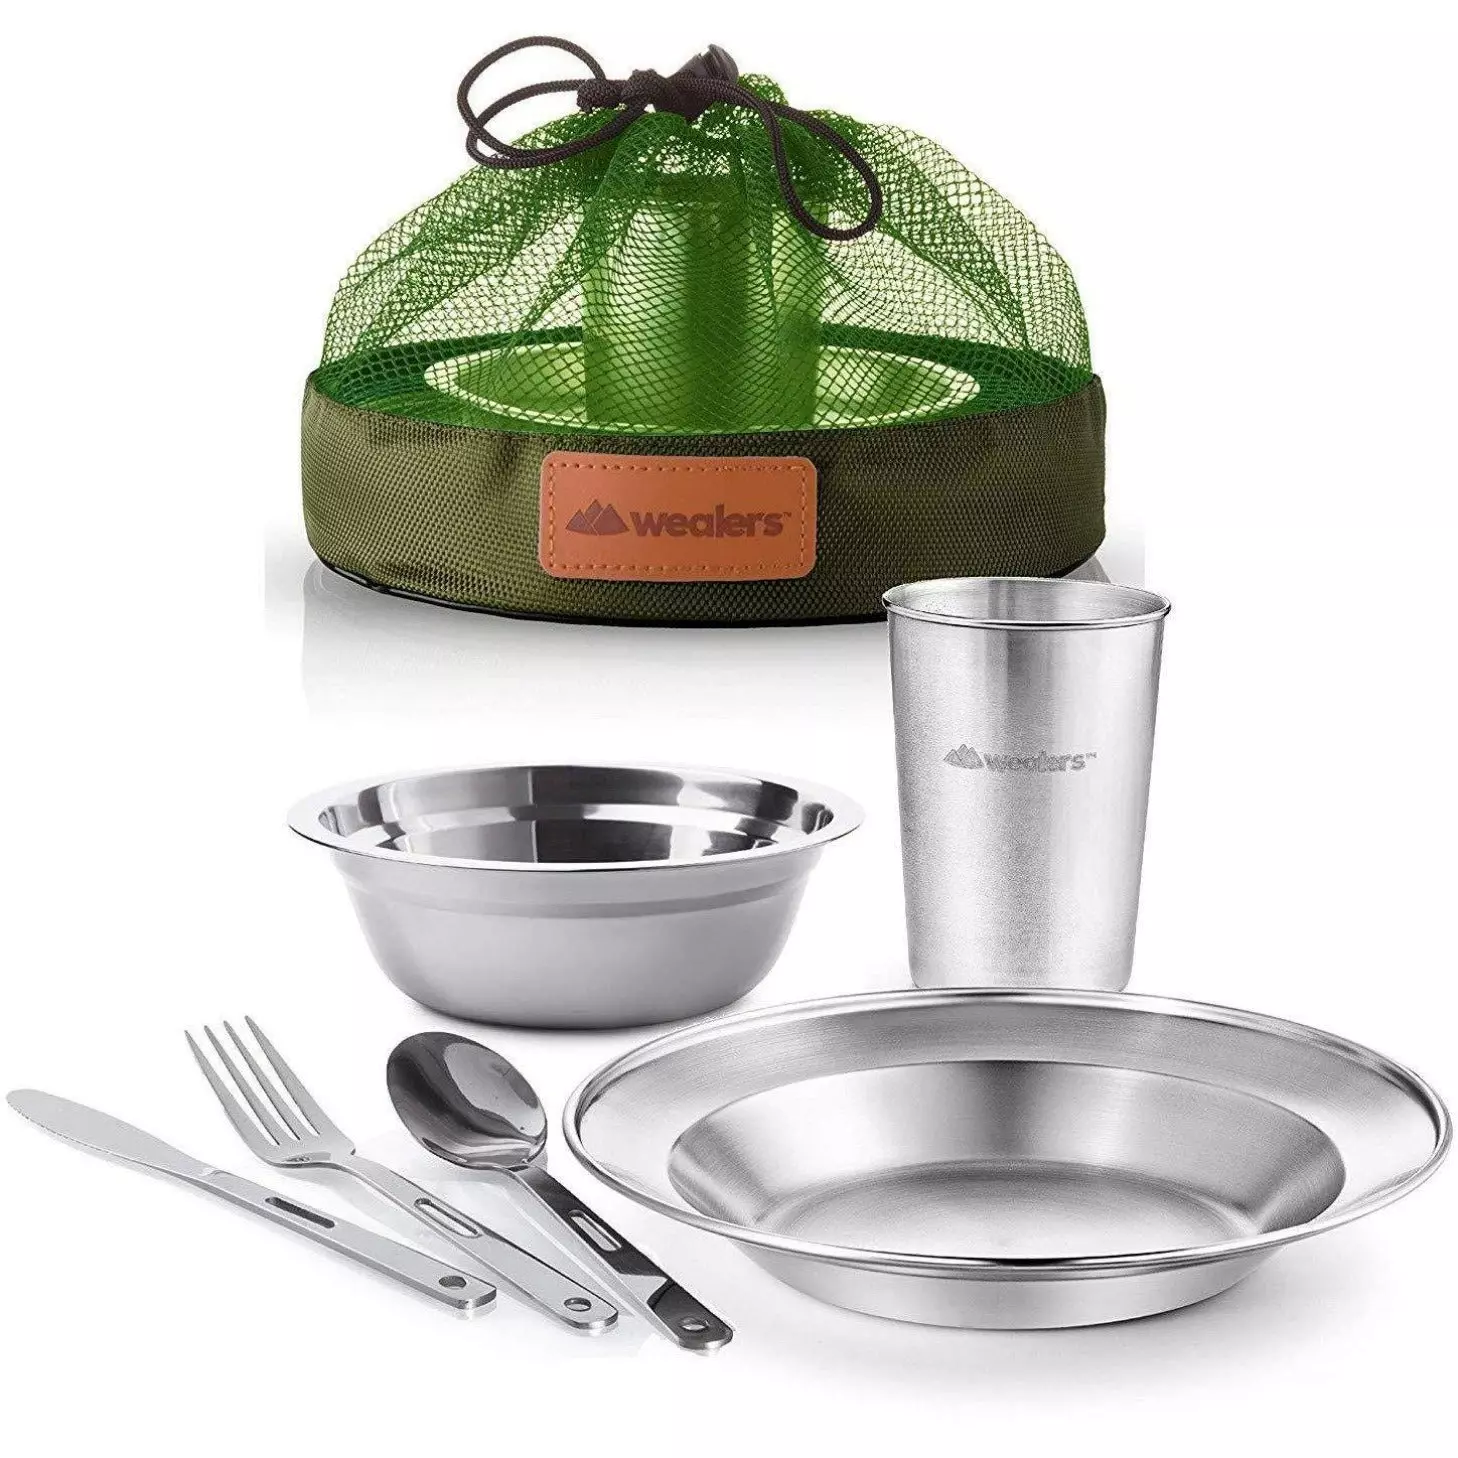 Unique Complete Messware Kit Polished Stainless Steel Dishes Set